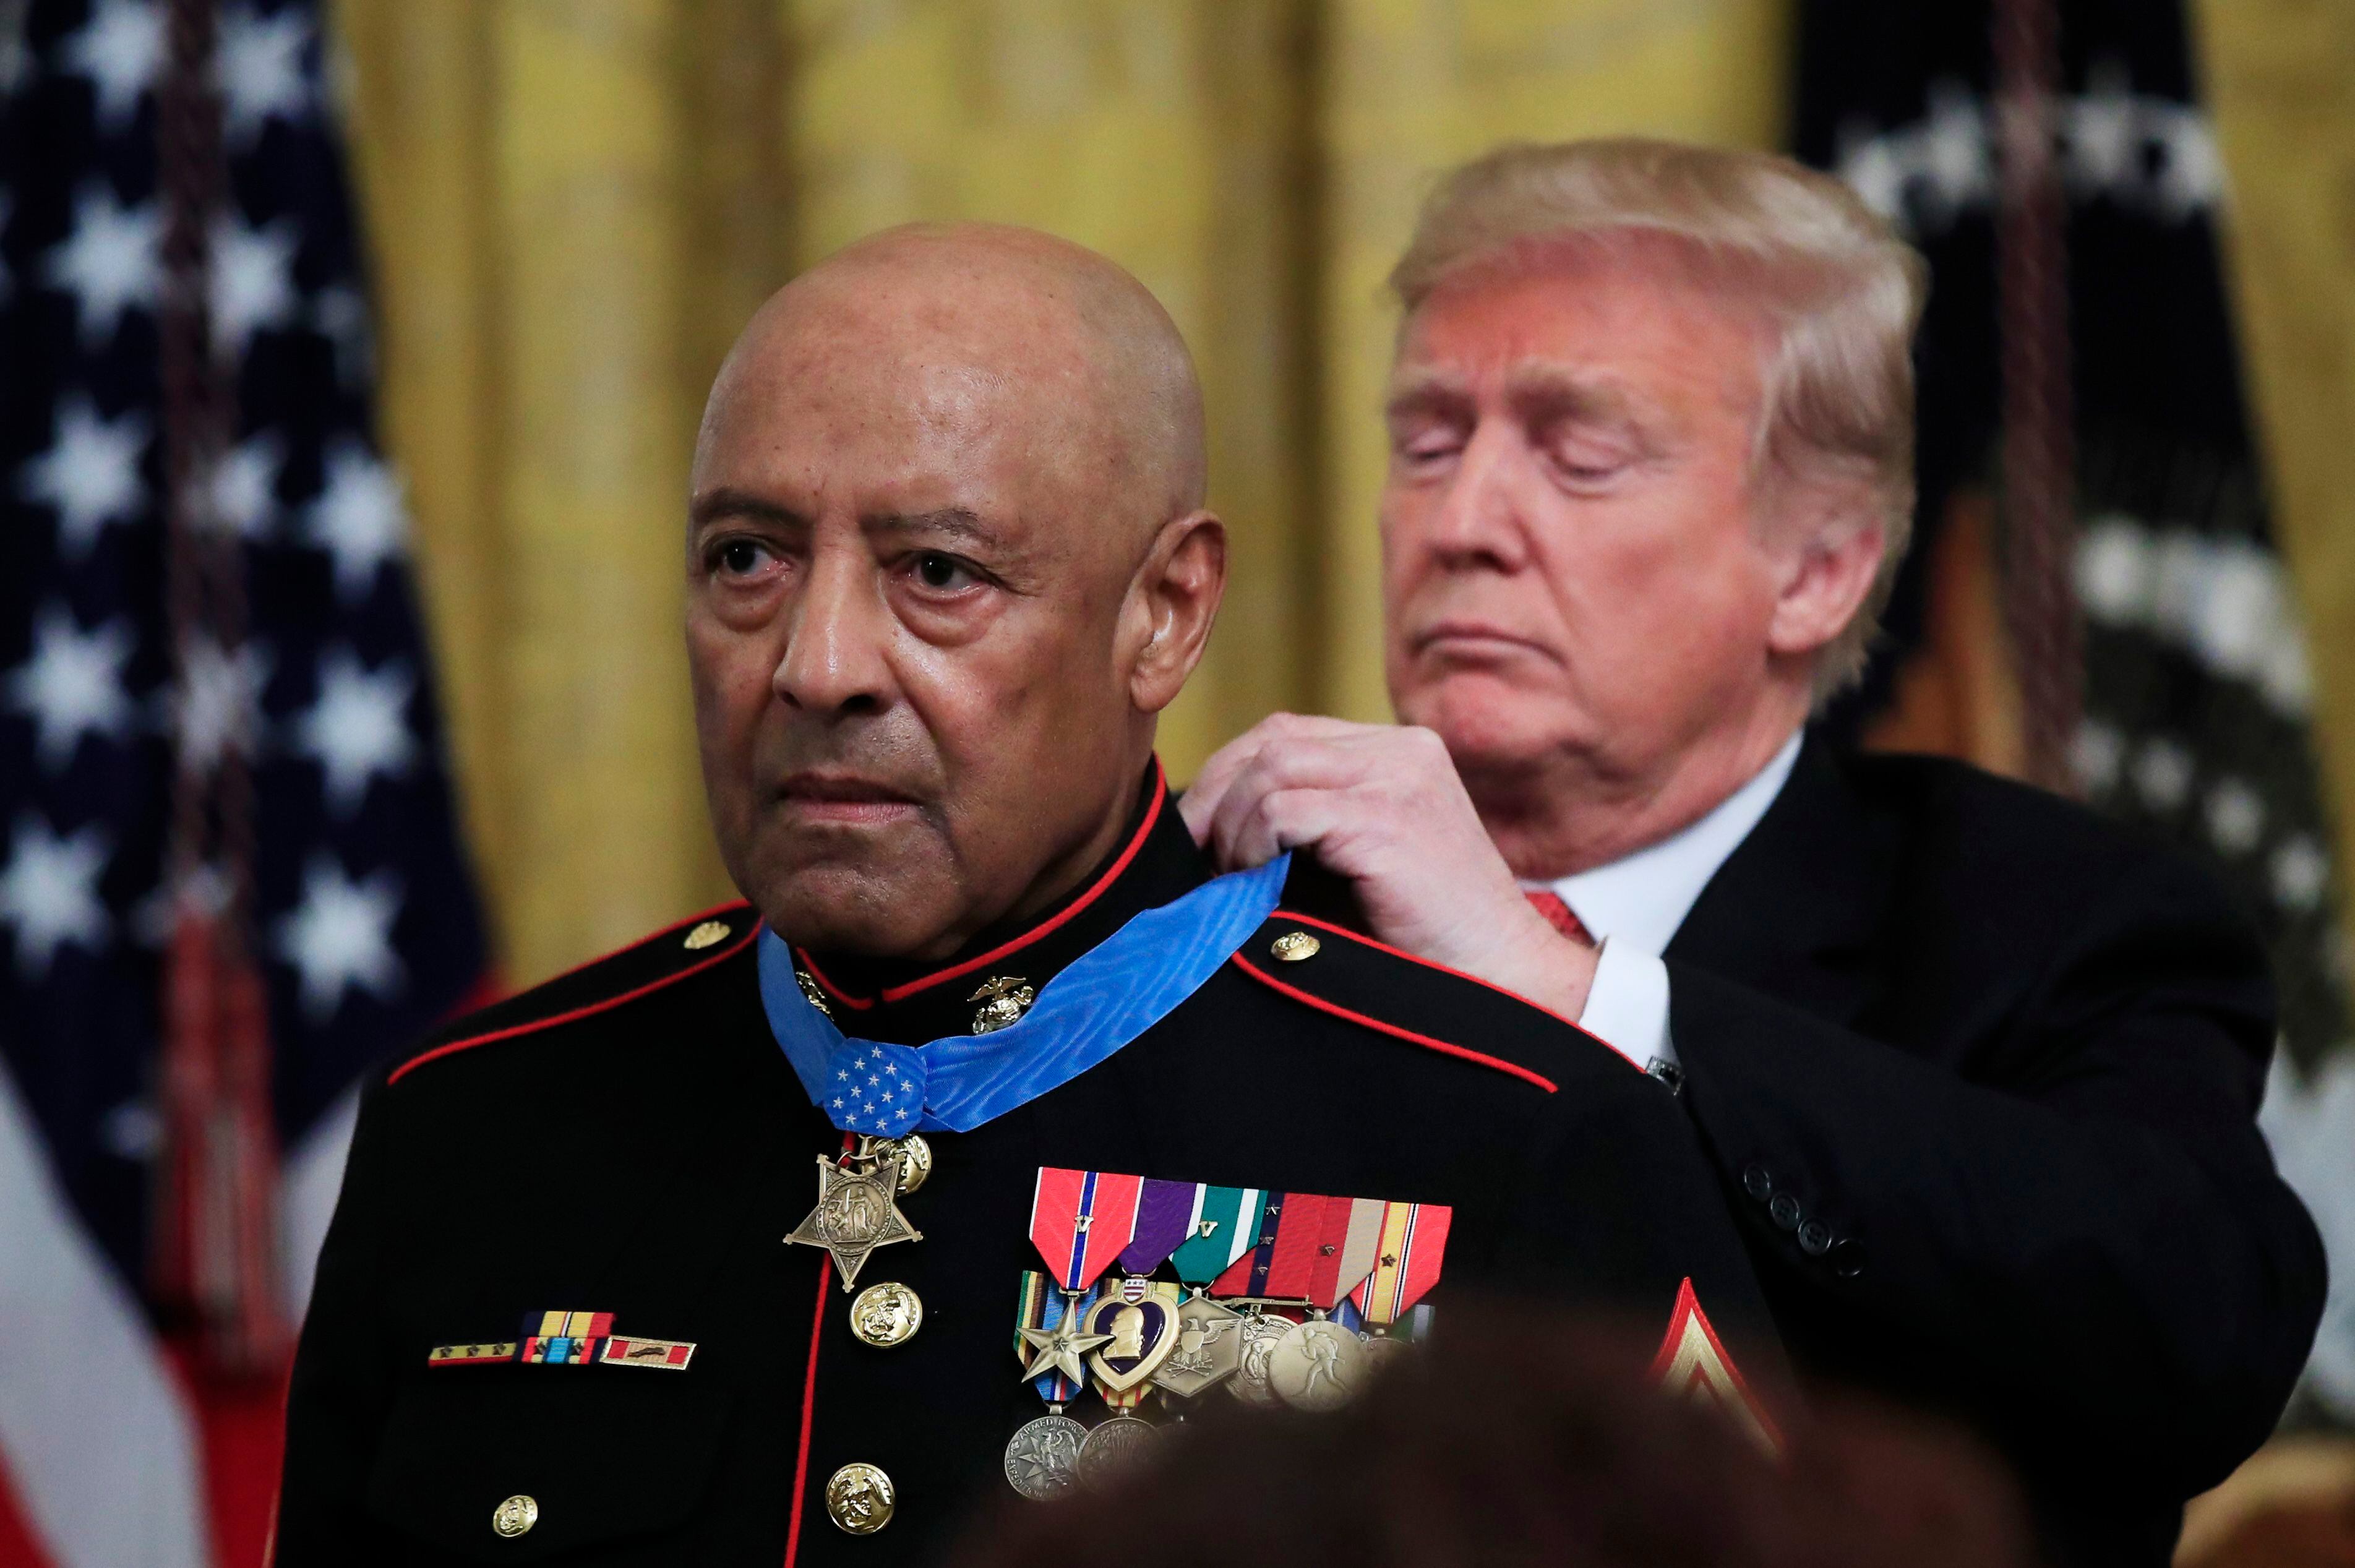 Vietnam Medal of Honor Marine dies after decade-long battle with cancer